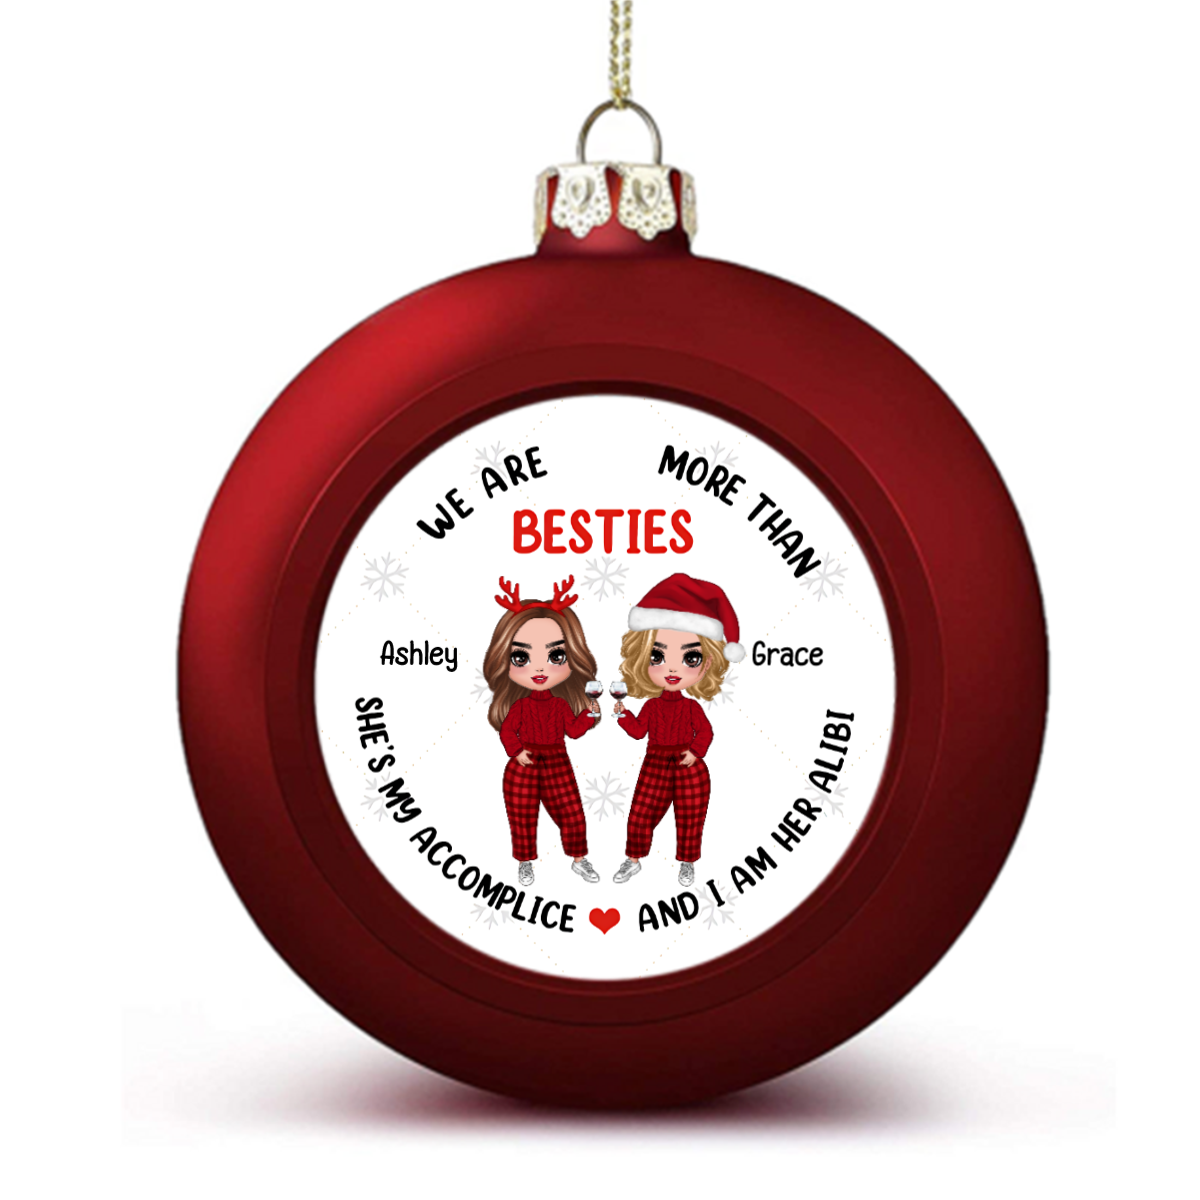 Doll Besties Accomplice Alibi Christmas Personalized Ball Ornaments